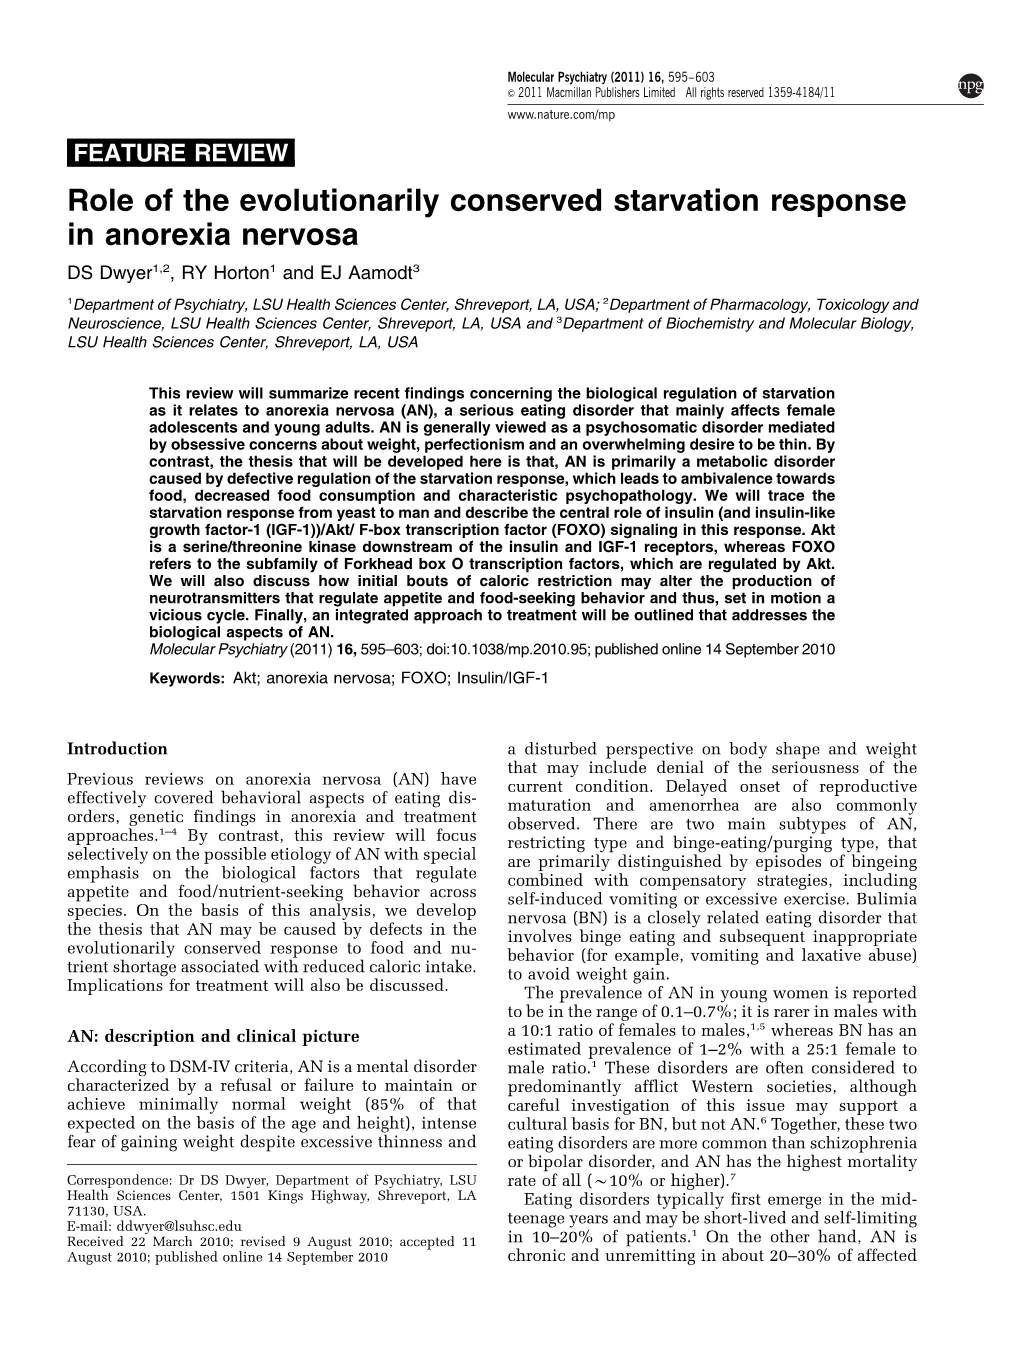 Role of the Evolutionarily Conserved Starvation Response in Anorexia